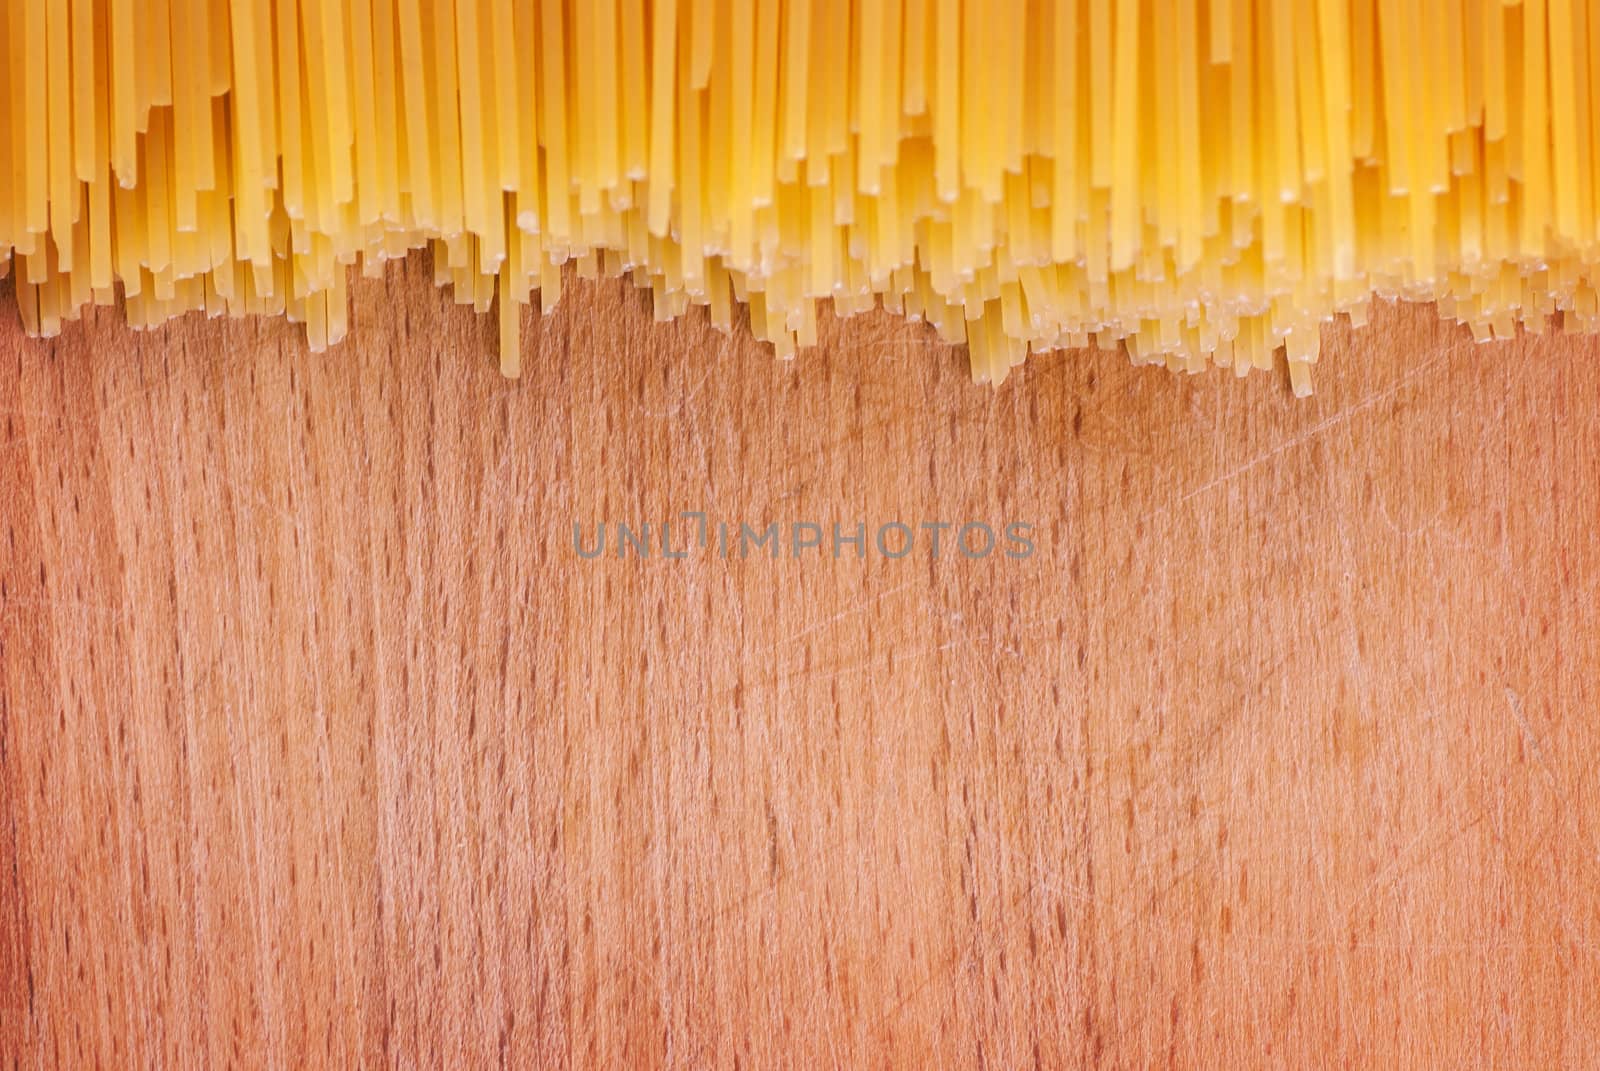 pasta on a wooden board, background